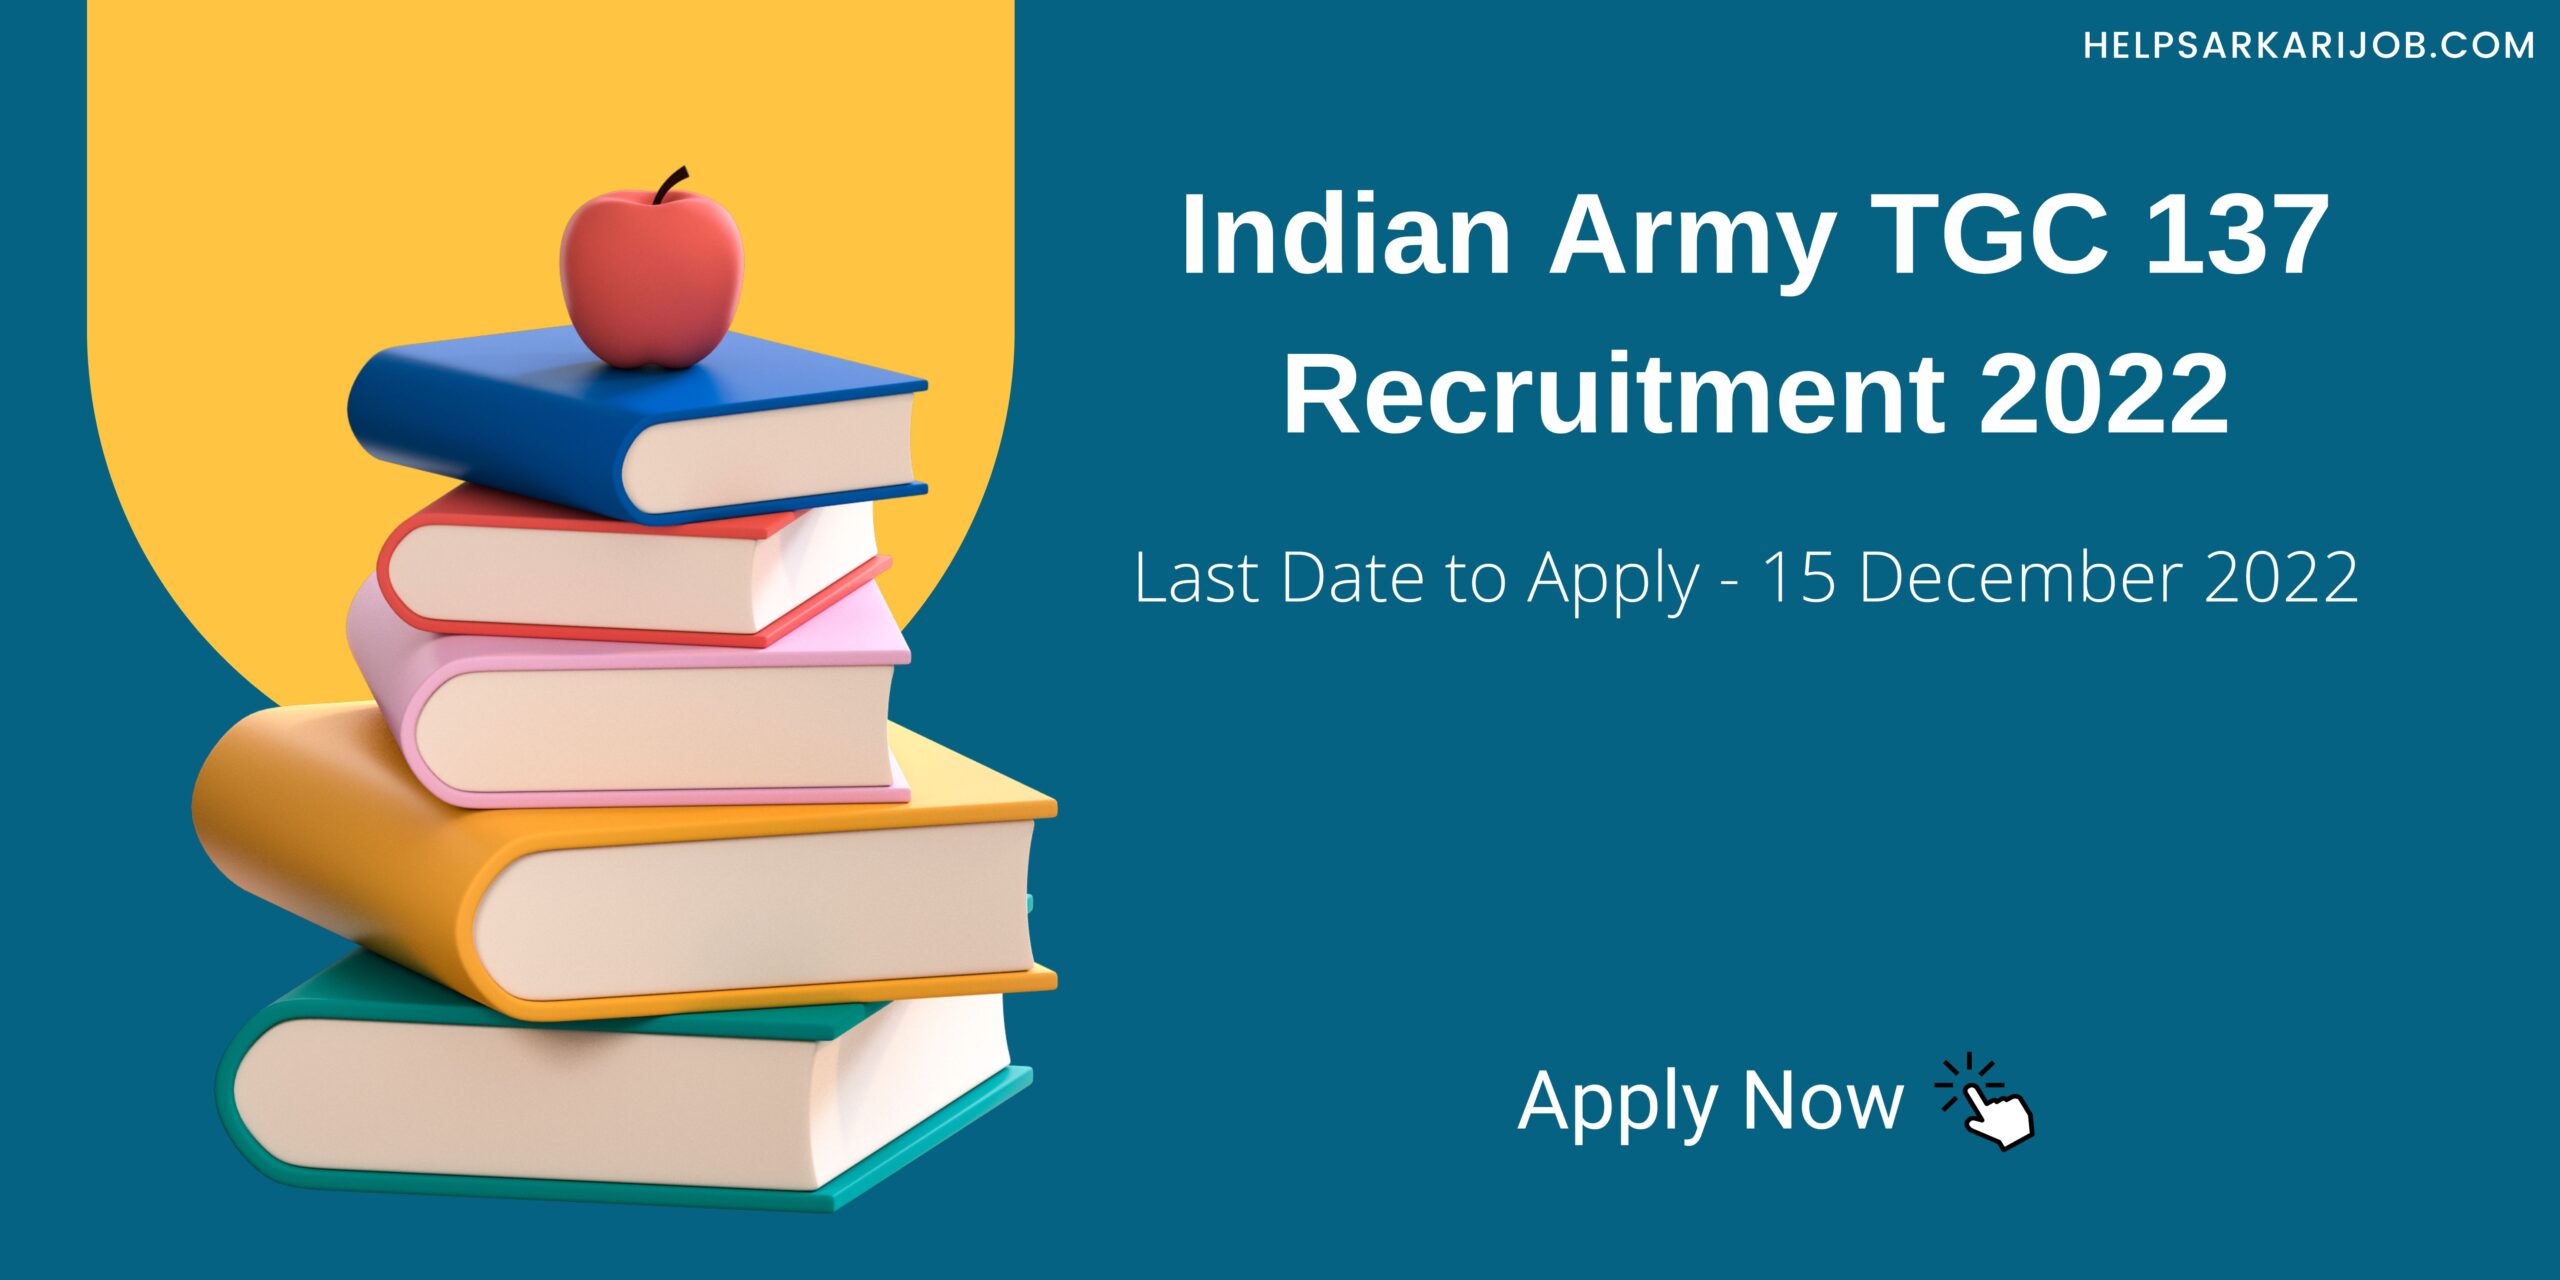 Indian Army TGC 137 Recruitment 2022 Last date to apply